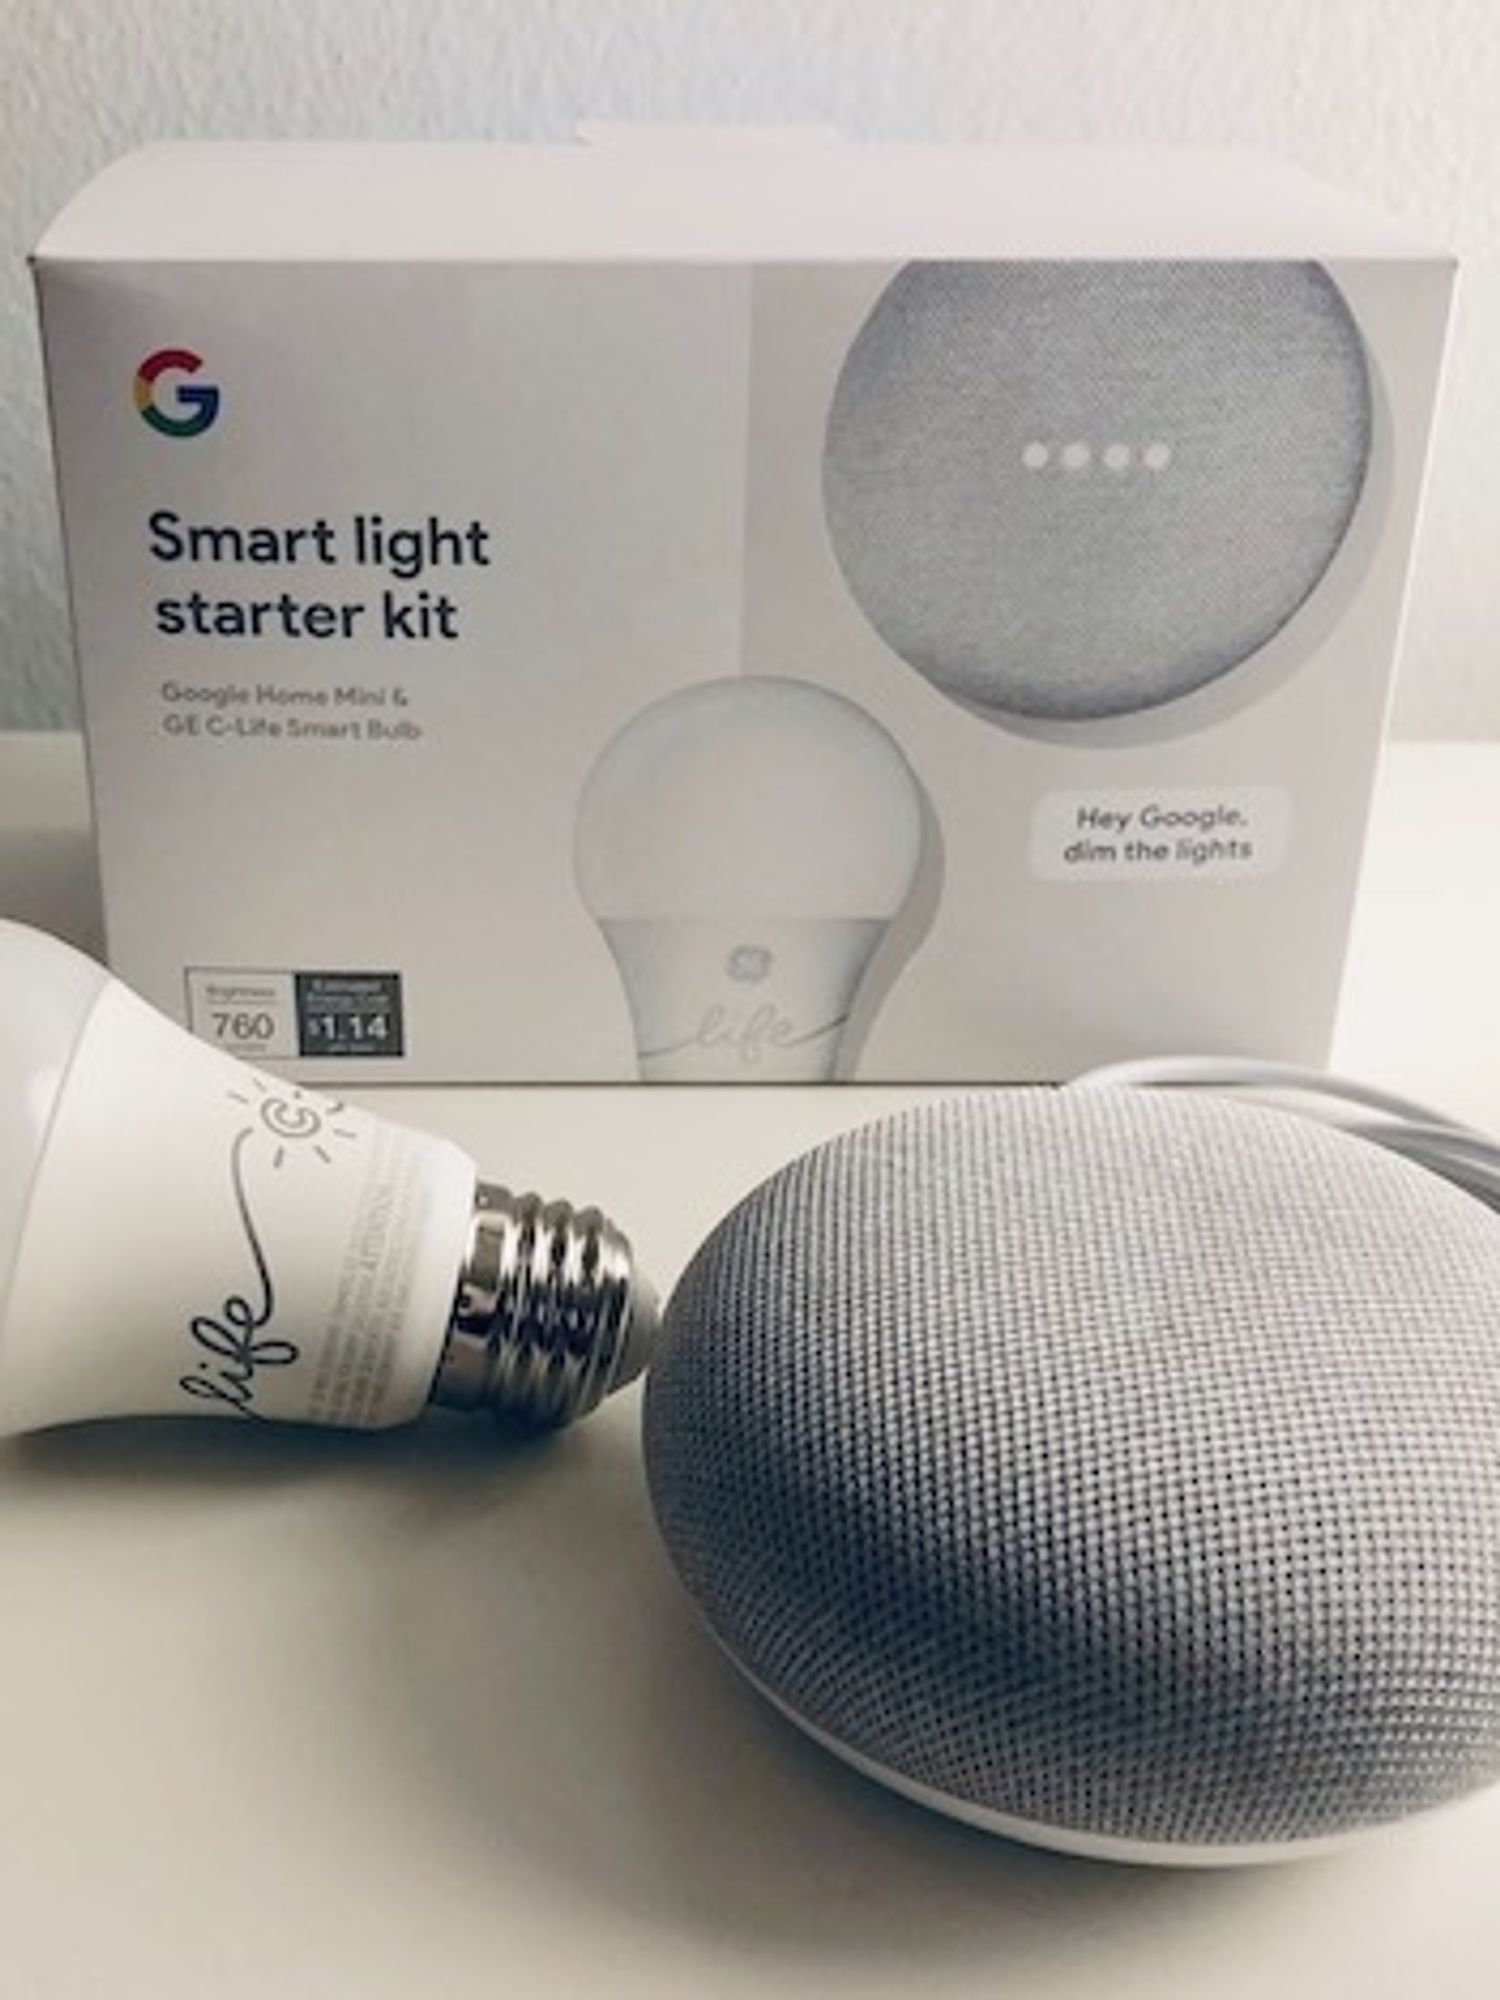 How to link C by GE smart lights to Google steps Gearbrain